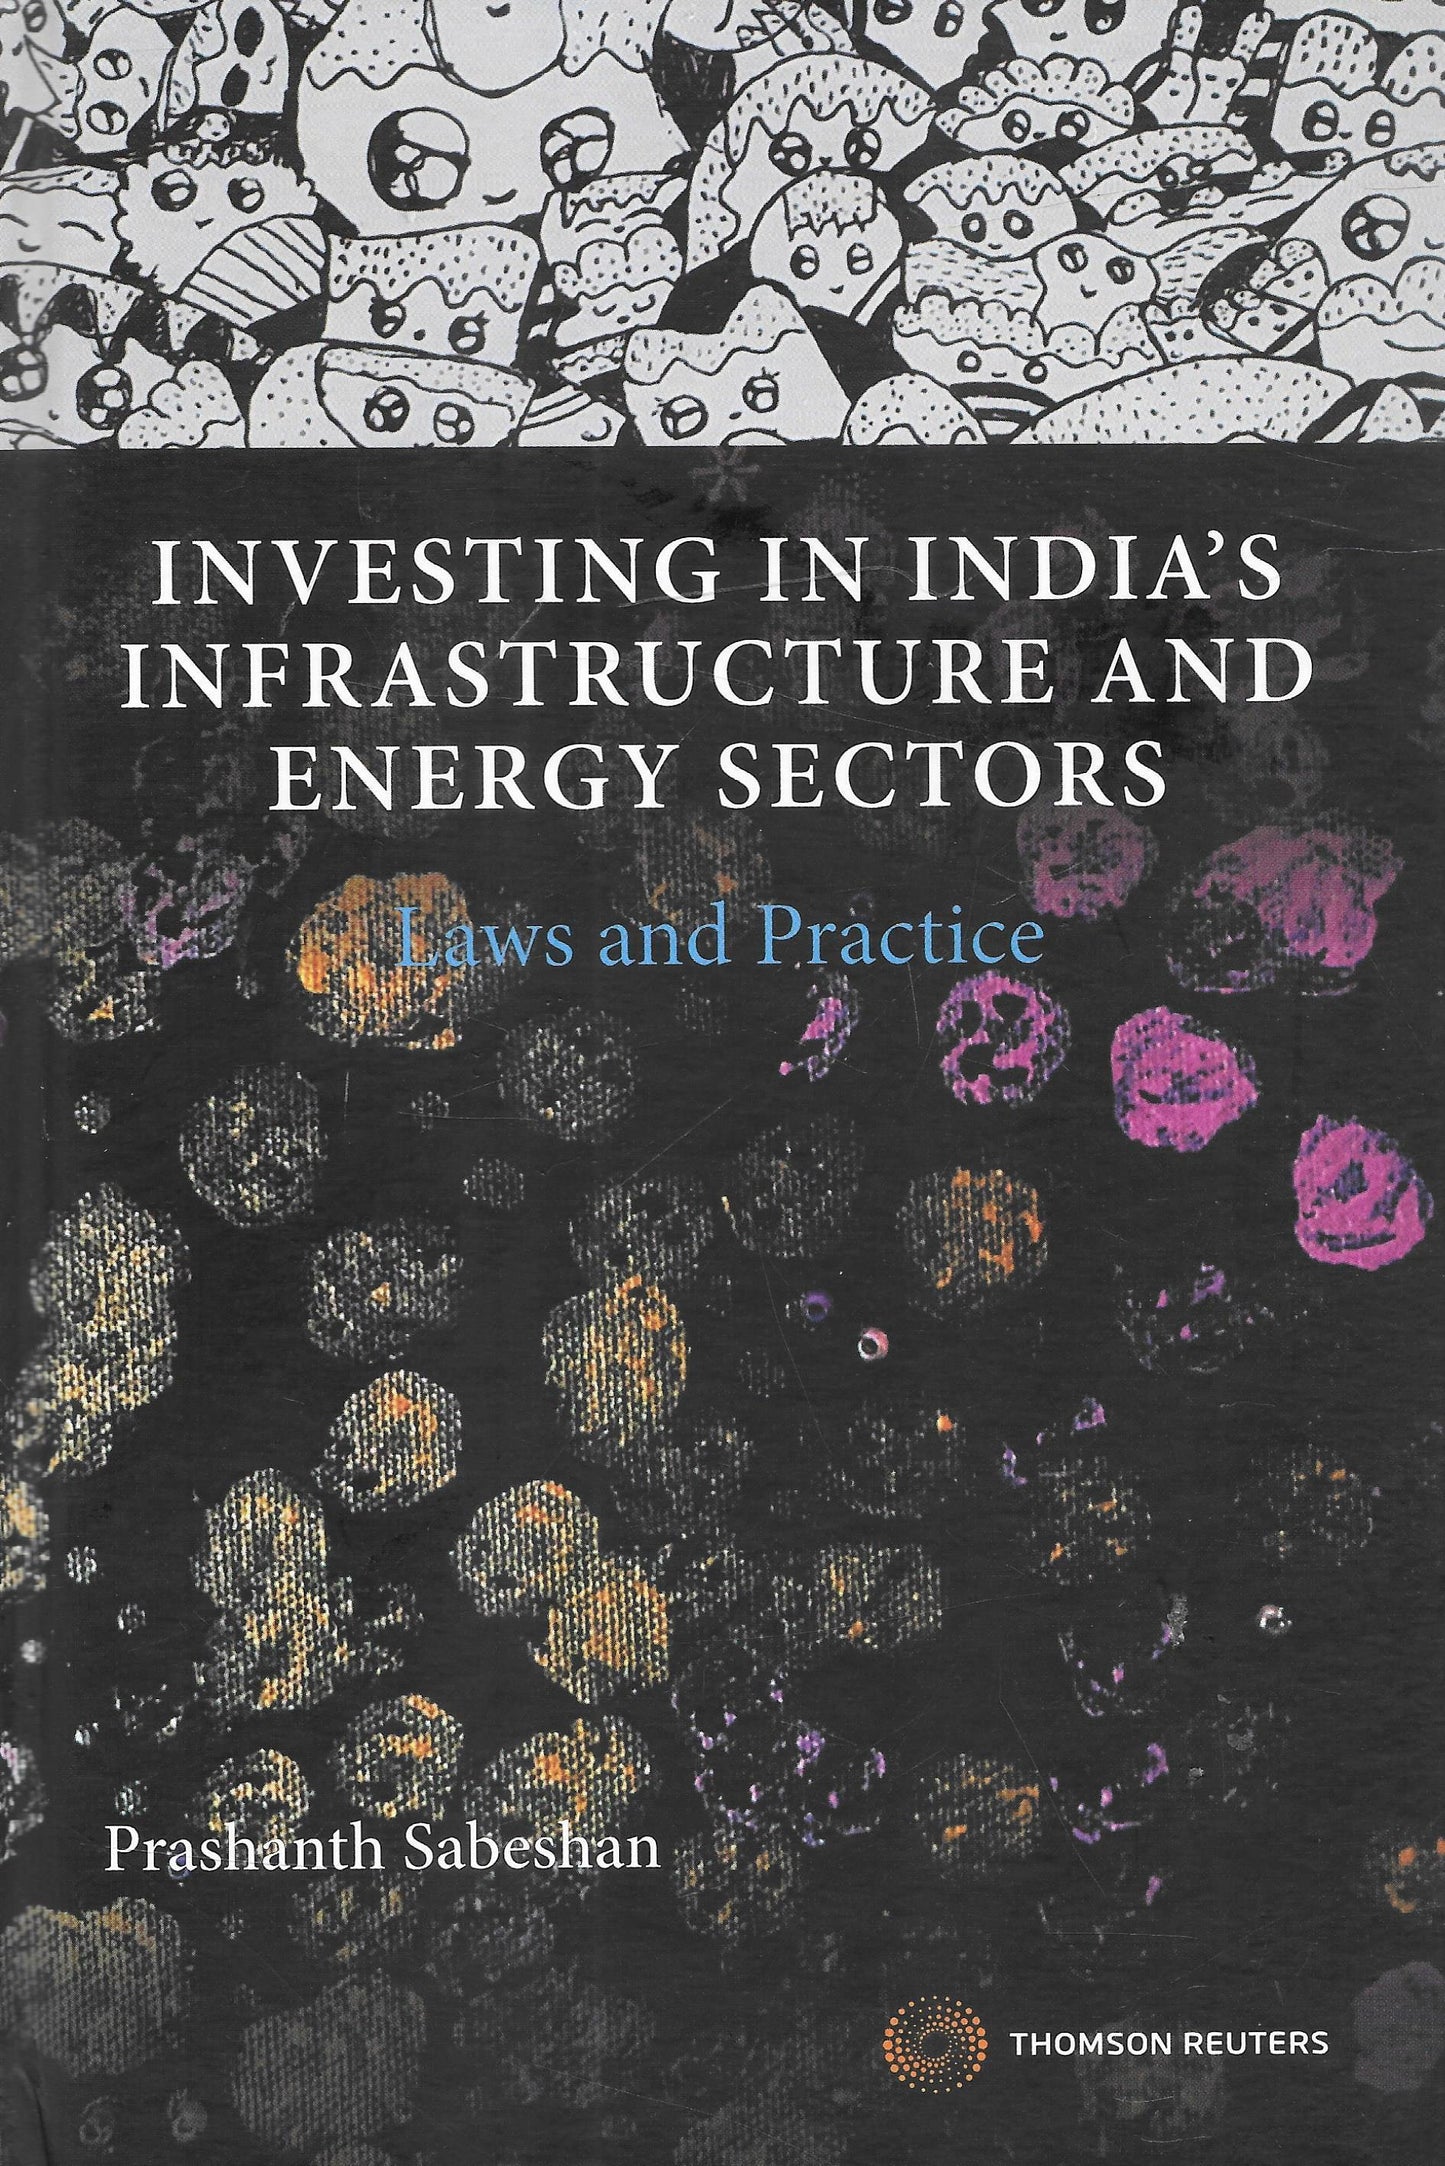 Investing in India's Infrastructure and Energy Sectors - Law and Practice